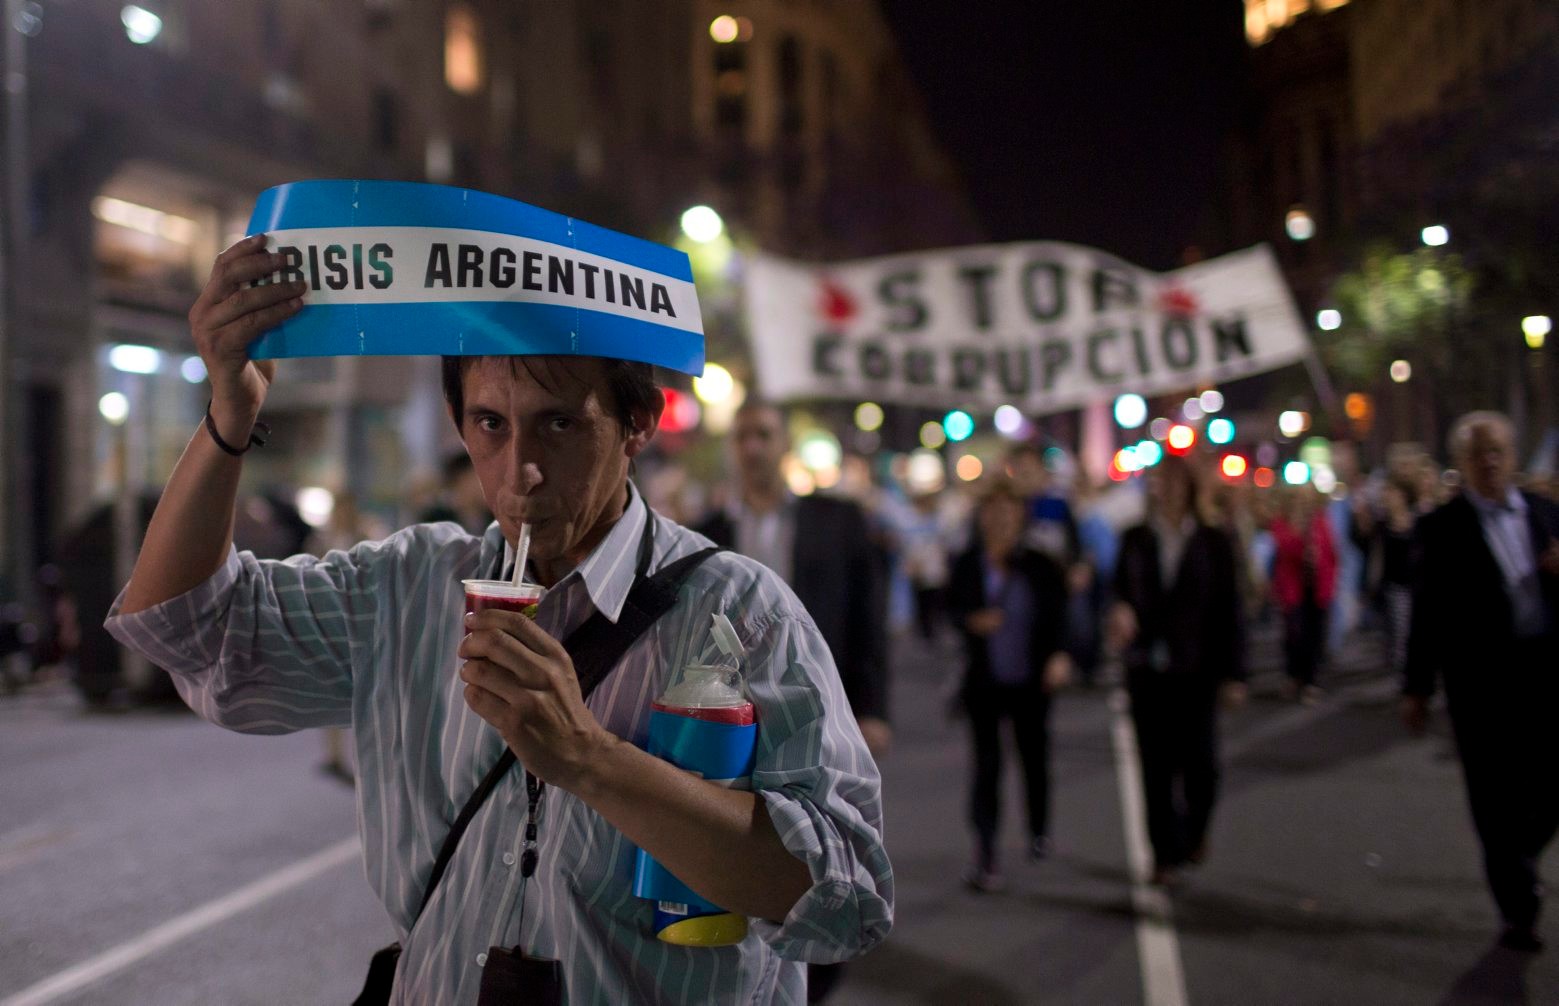 A man holds a banner reading in Spanish "Argentina Crisis" as he drinks mate, a herbal tea, during a protest against the government of Argentina's President Cristina Fernandez in Plaza de Mayo in Buenos Aires, Argentina, Thursday, Nov. 13, 2014.  (AP Photo/Natacha Pisarenko) APTOPIX Argentina Protest